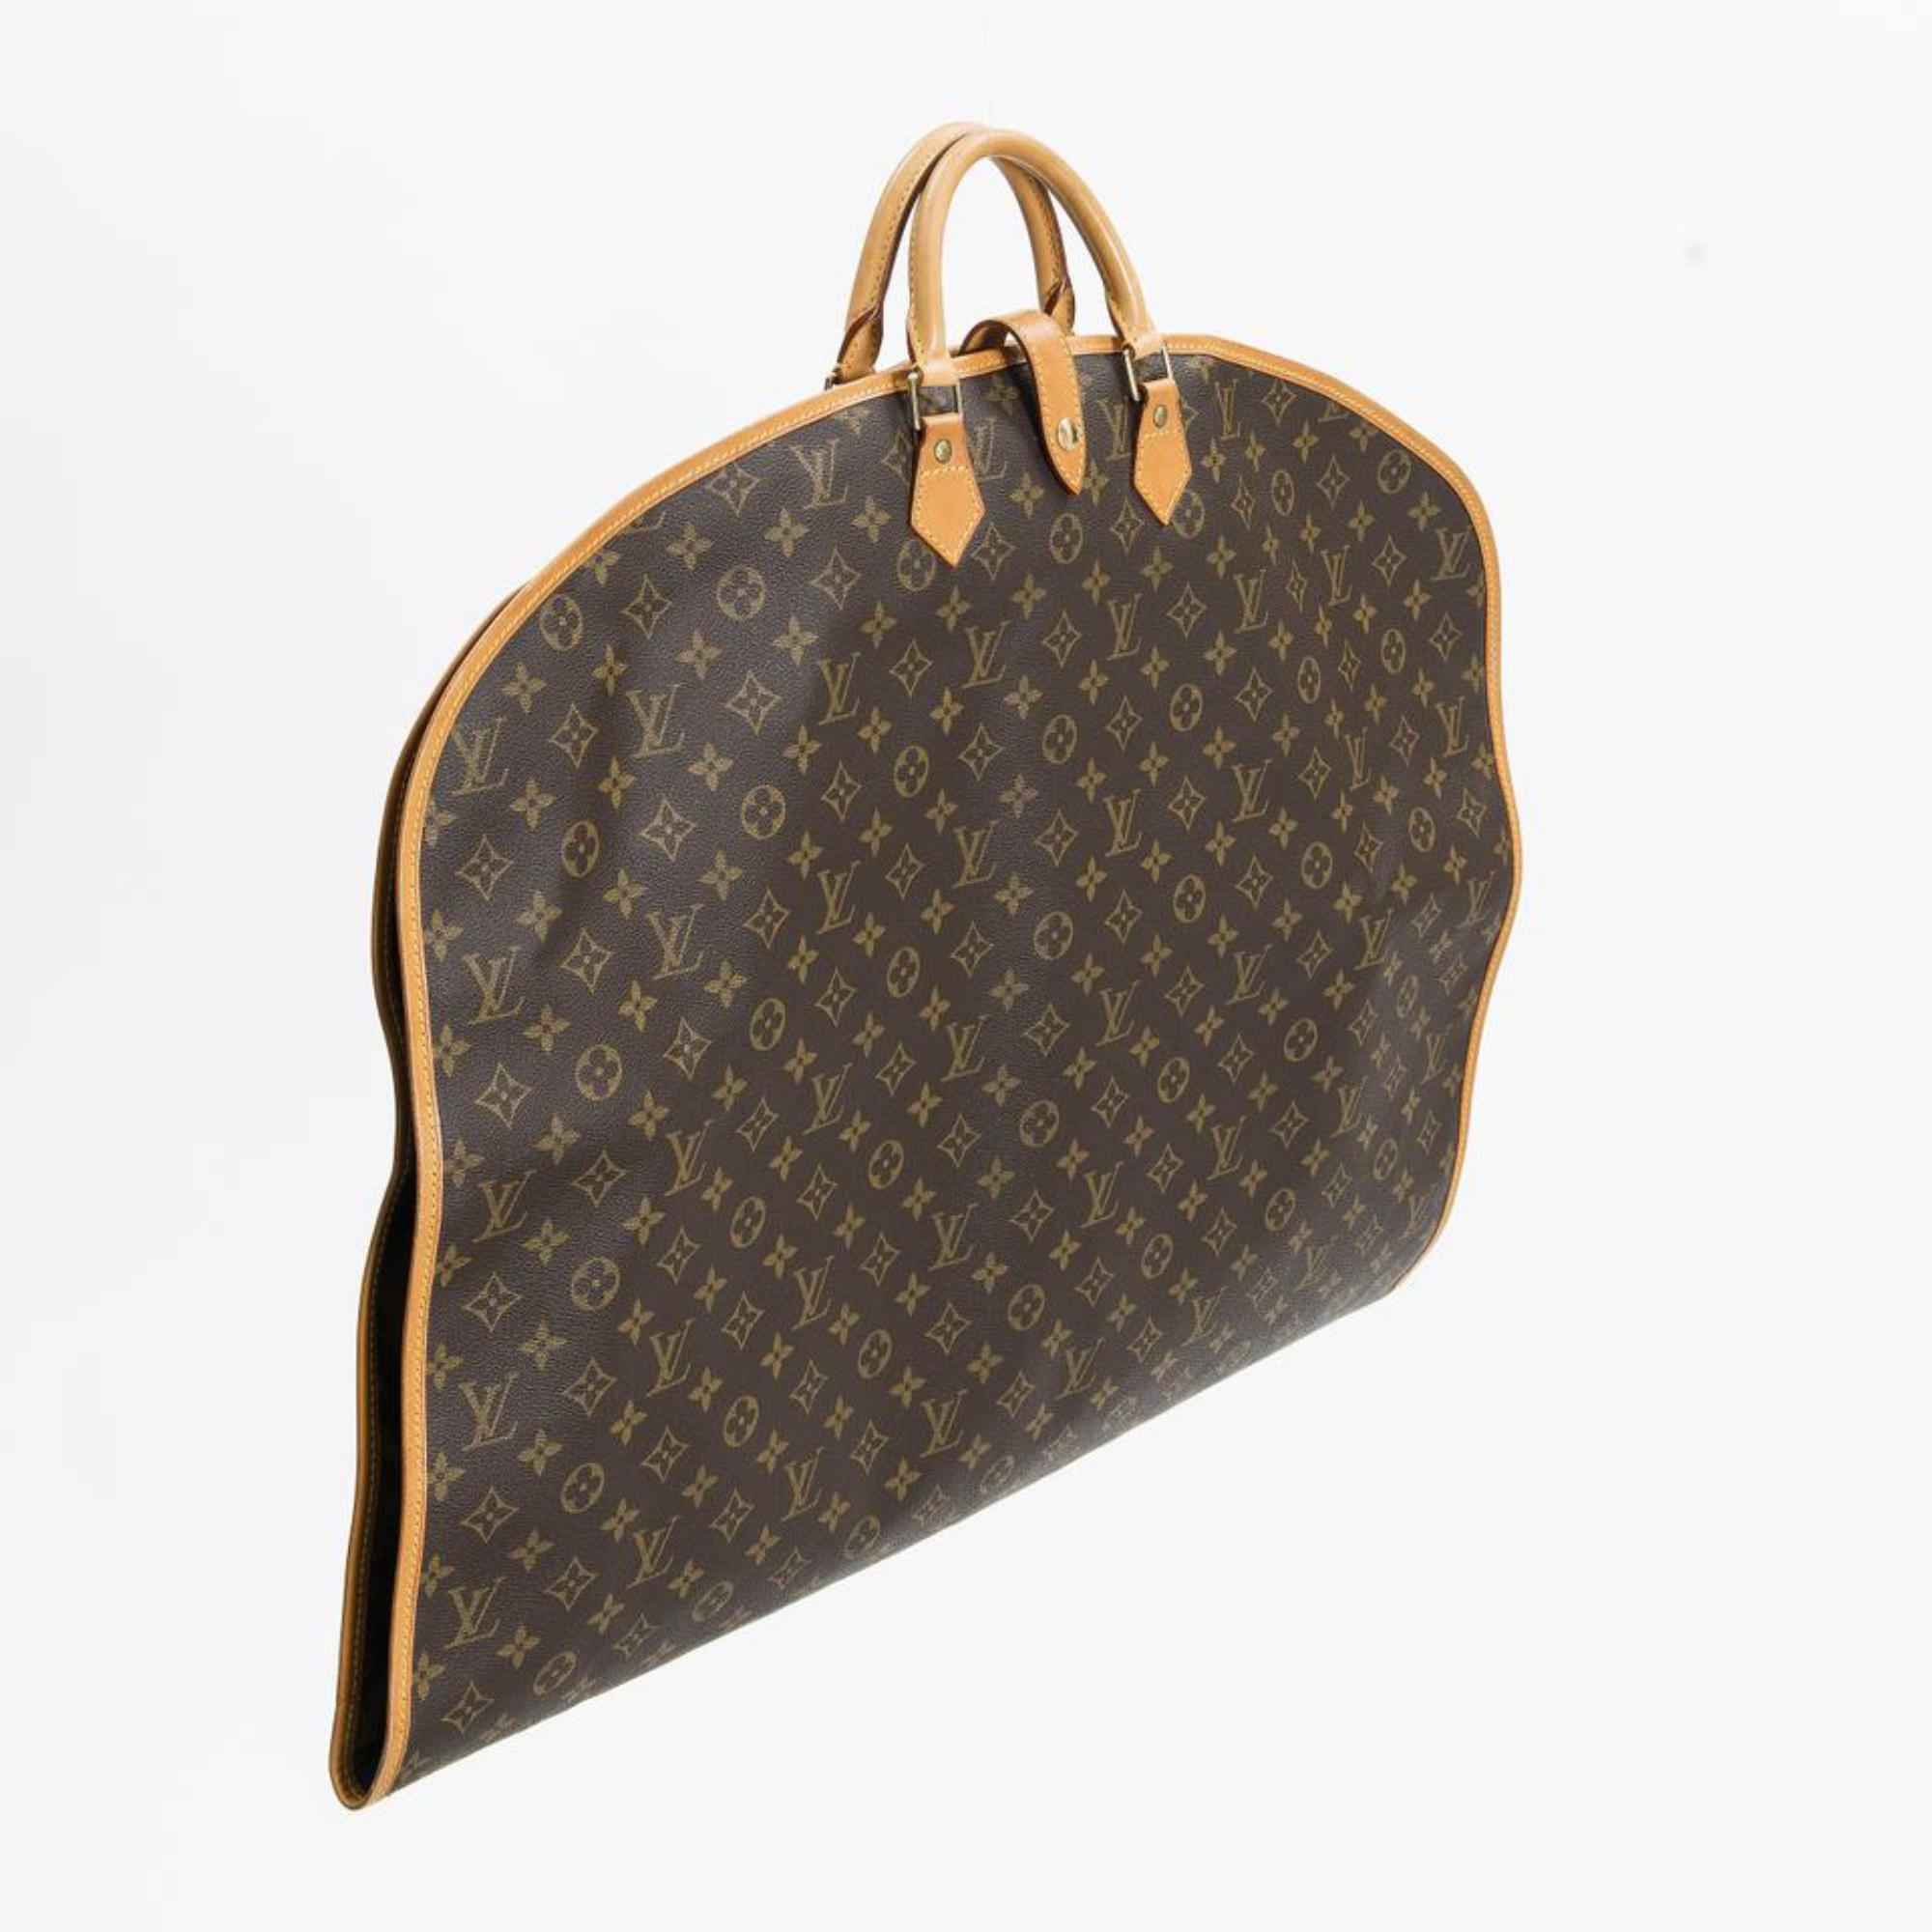 Louis Vuitton Monogram Porte Habits Housse Garment Carrier Cover Upcycle Ready 45lk6
Date Code/Serial Number: SP0994
Made In: France
Measurements: Length:  24.5